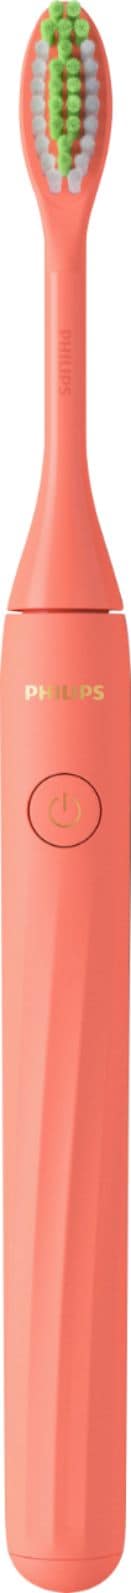 Philips Sonicare - Philips One by Sonicare Battery Toothbrush - Miami Coral_7